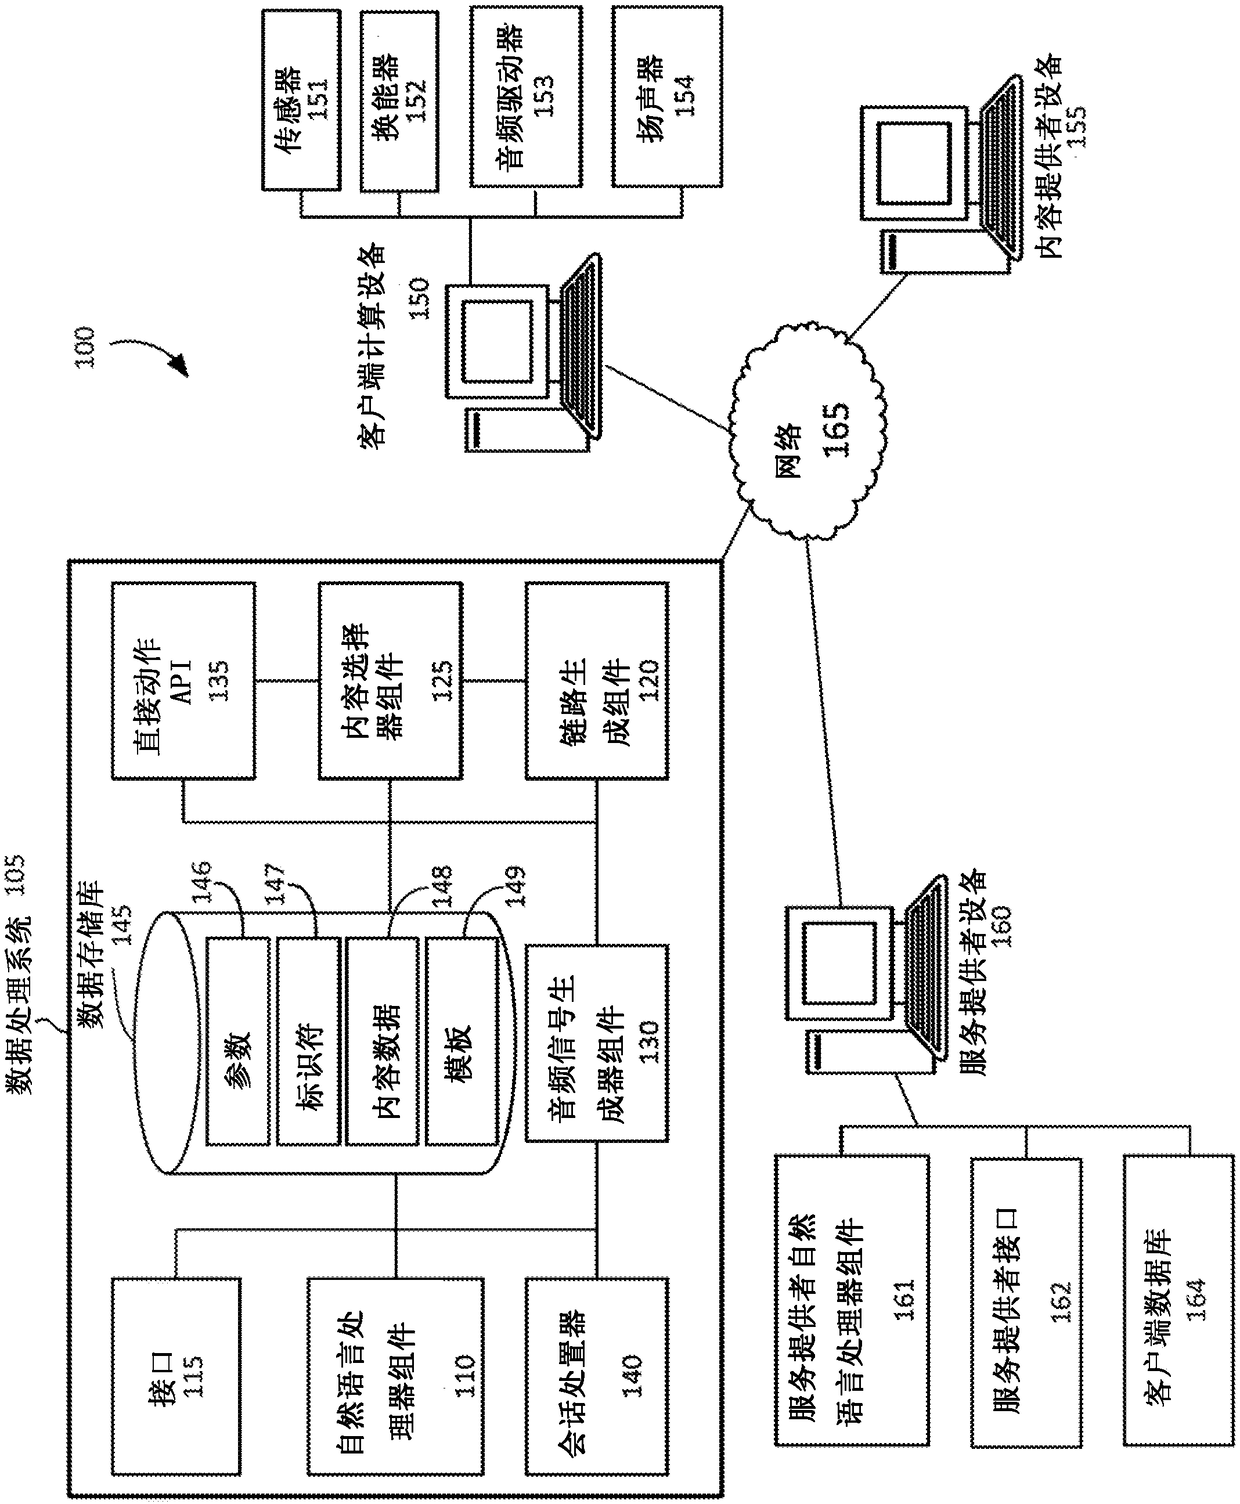 Device identifier dependent operation processing of packet based data communication